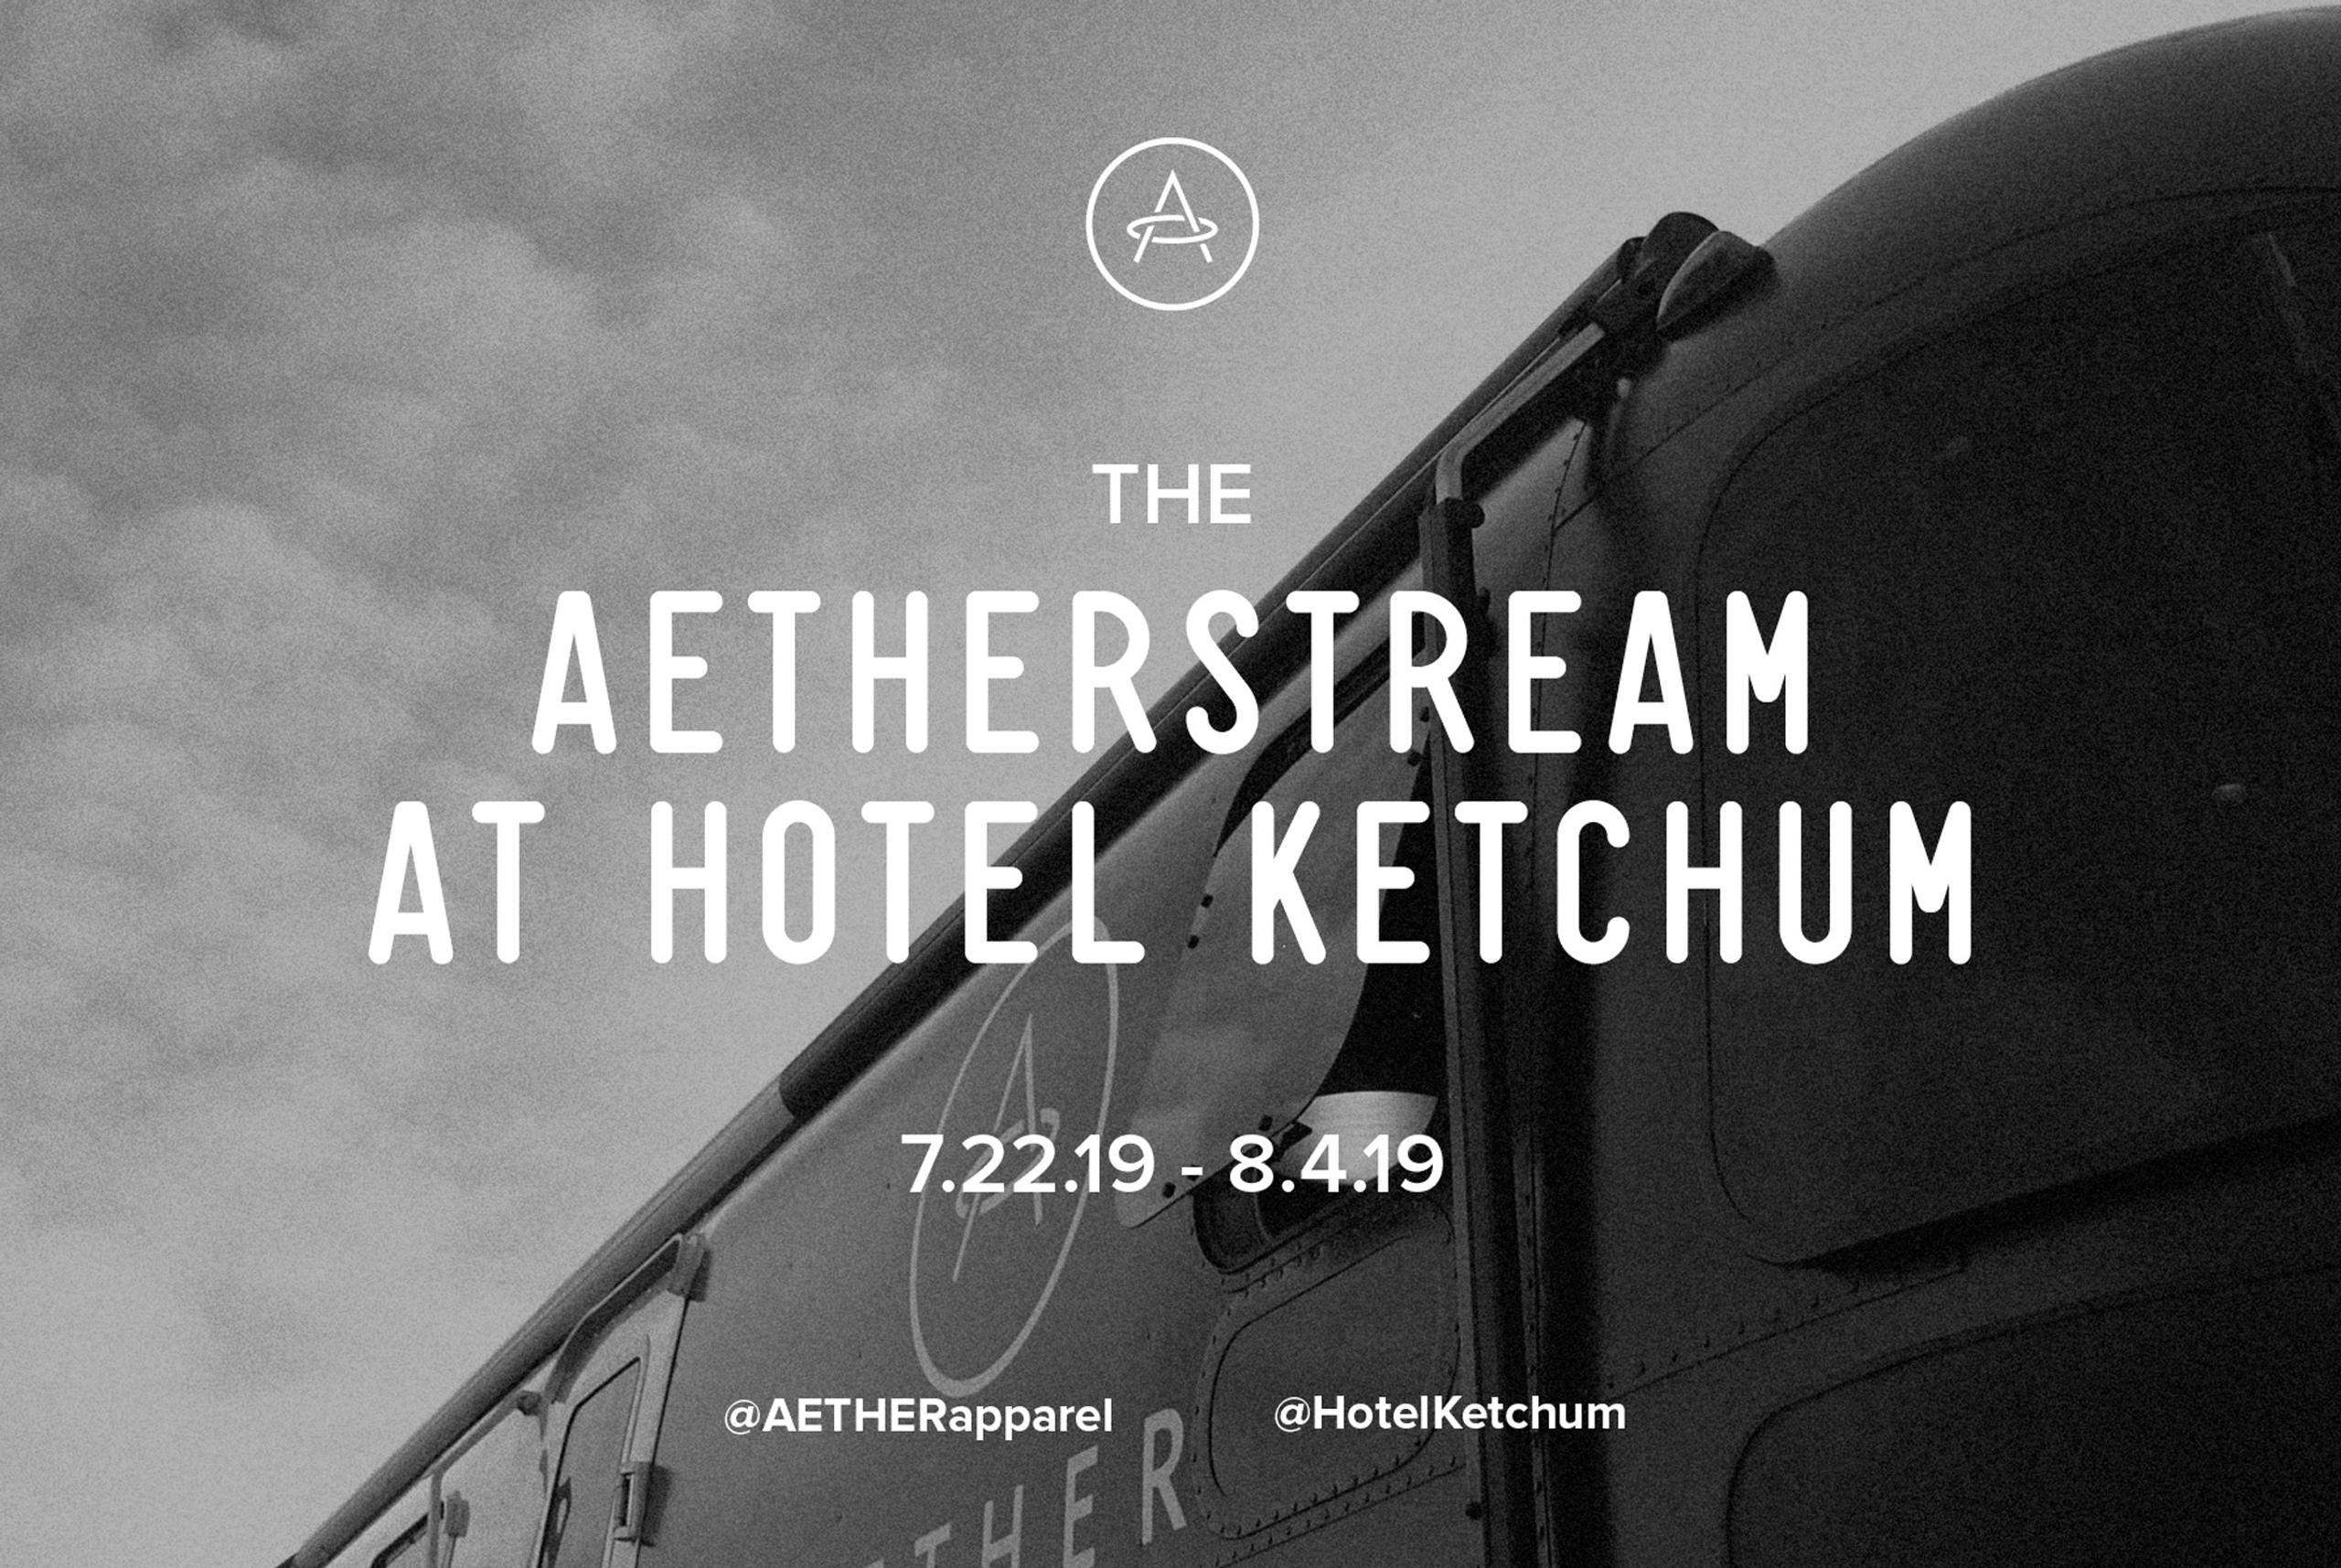 aetherstream at hotel ketchum 2019